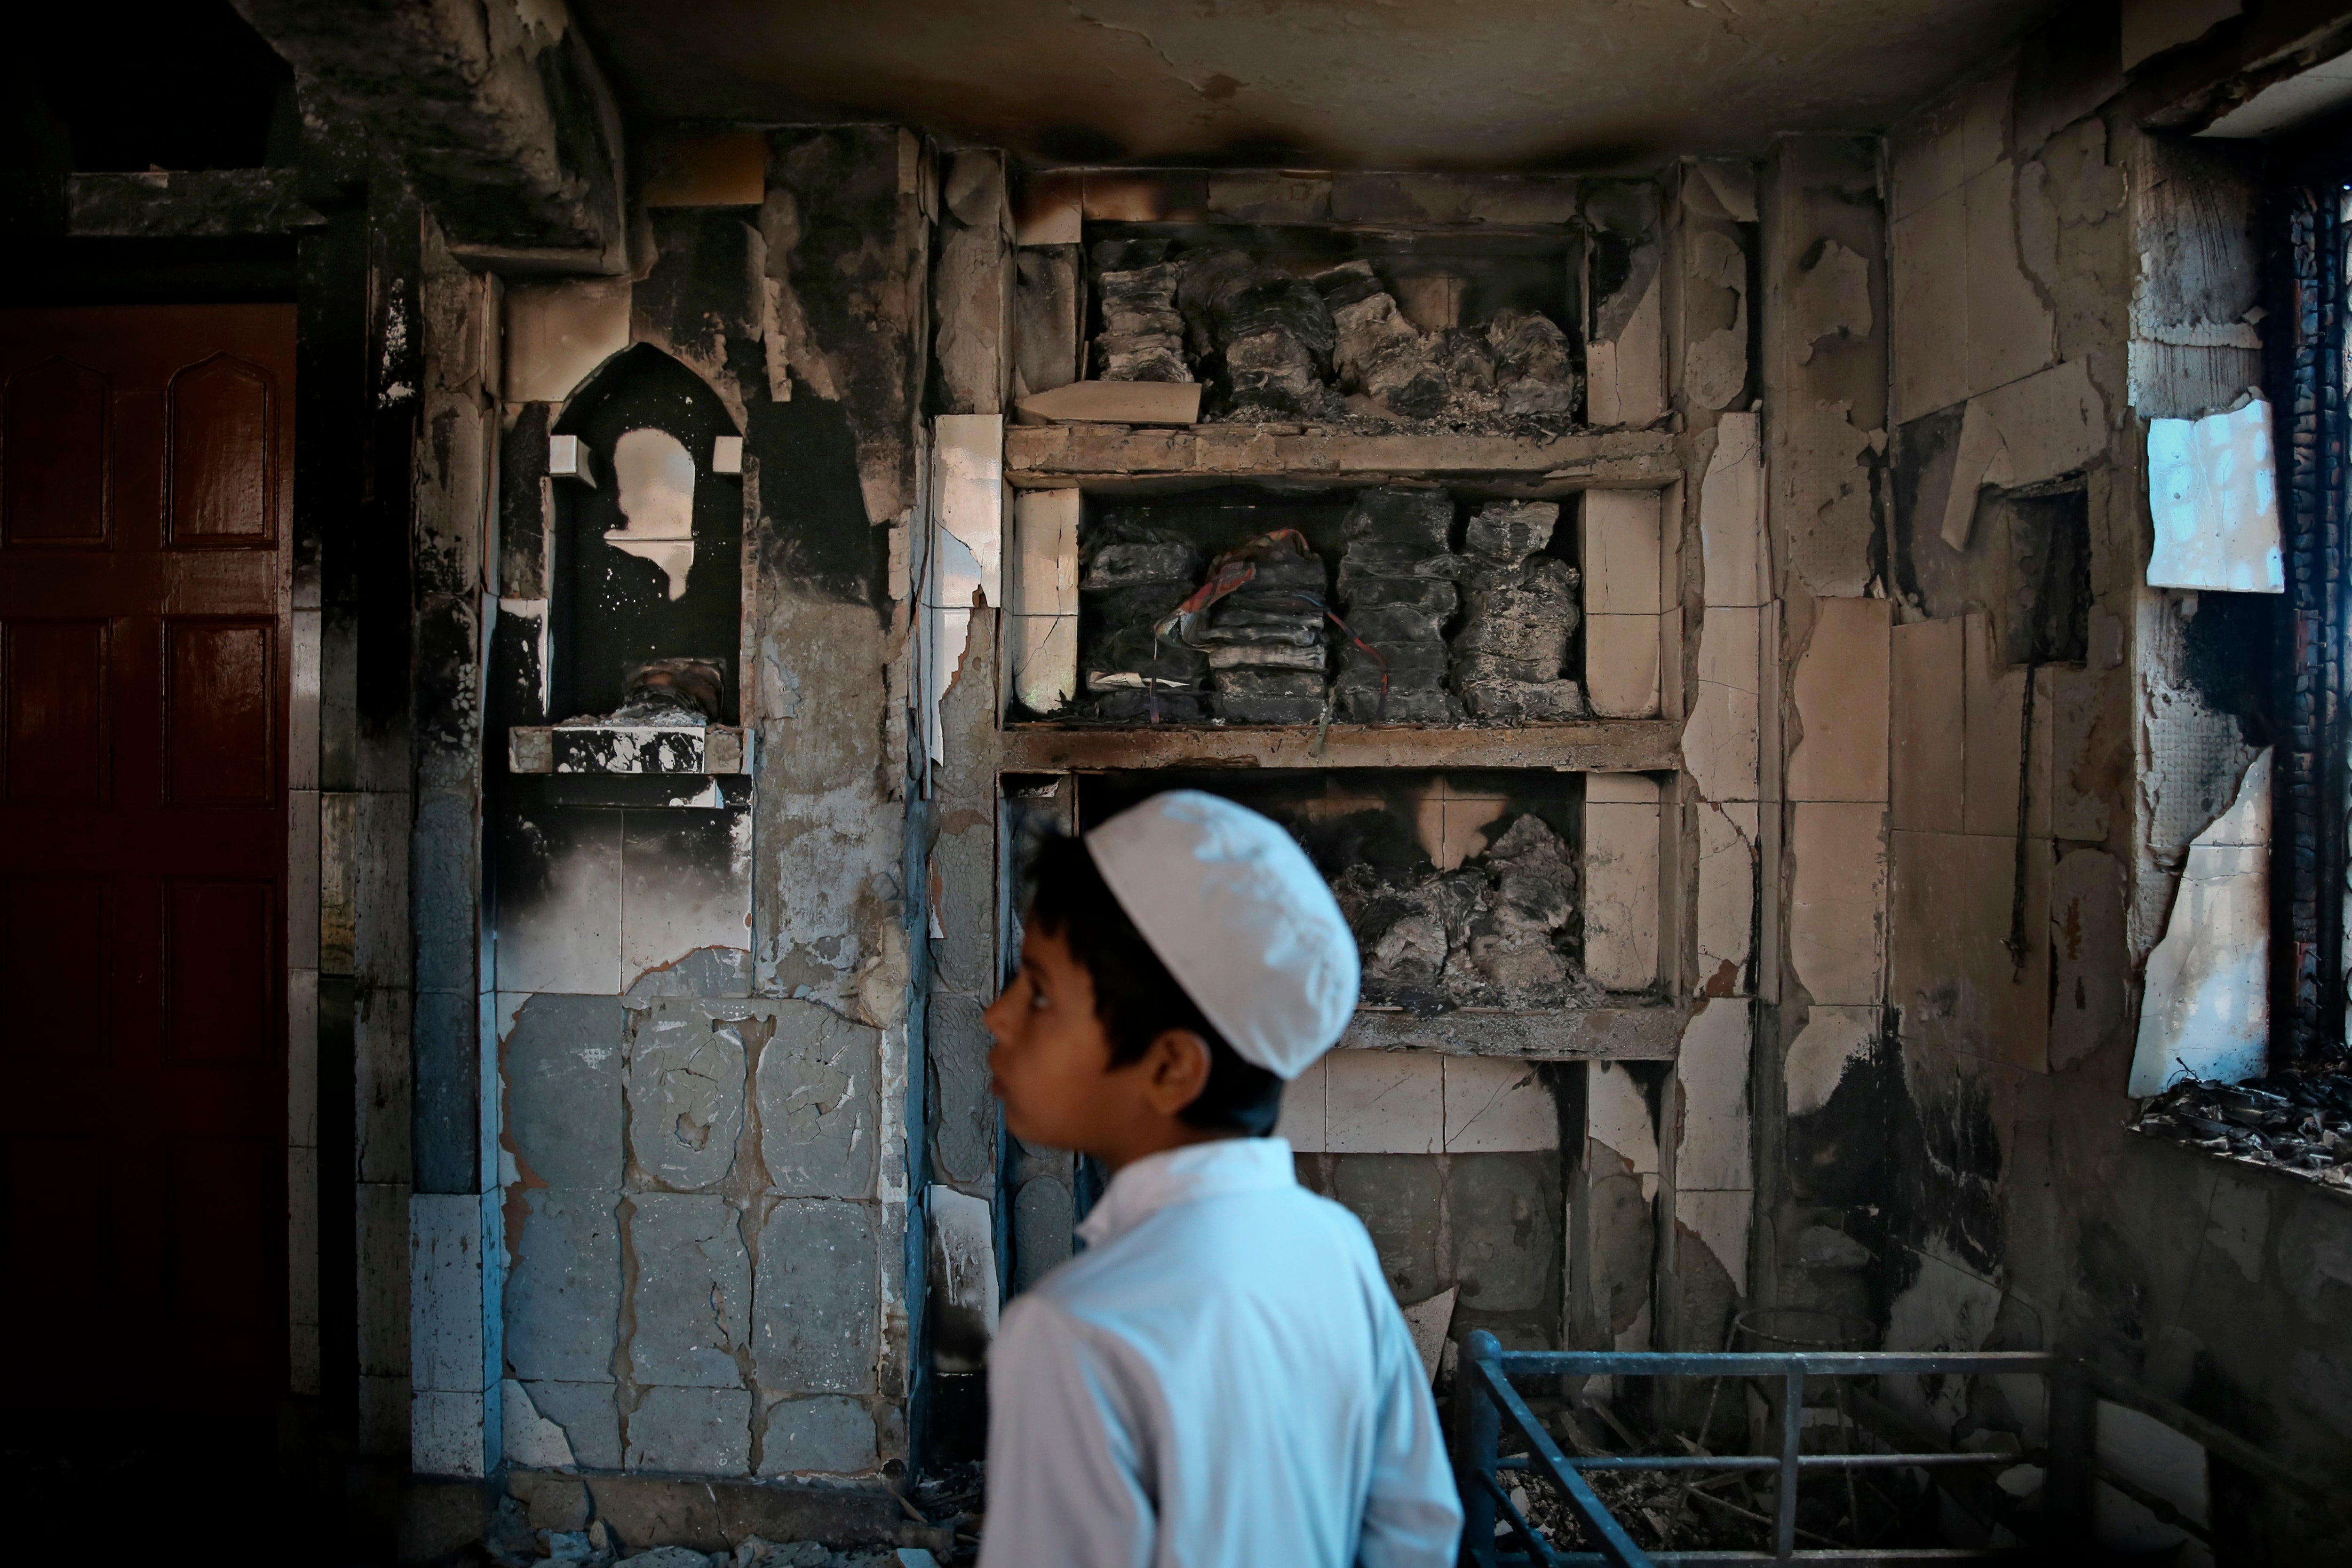 A mosque burnt last year in the riots in north-east Delhi